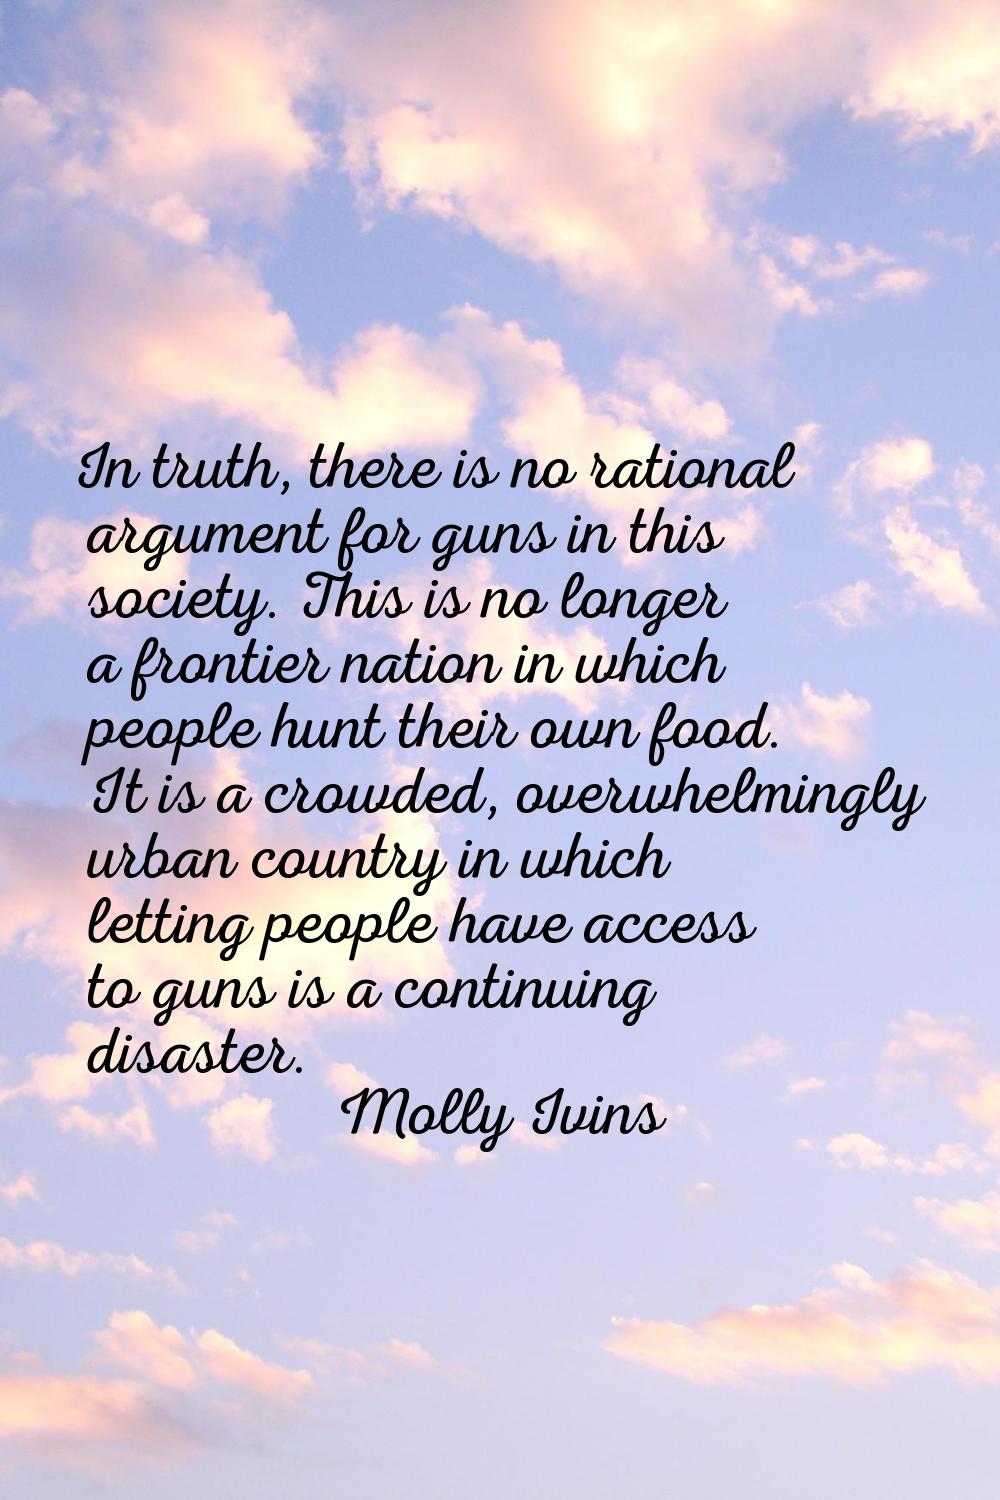 In truth, there is no rational argument for guns in this society. This is no longer a frontier nati